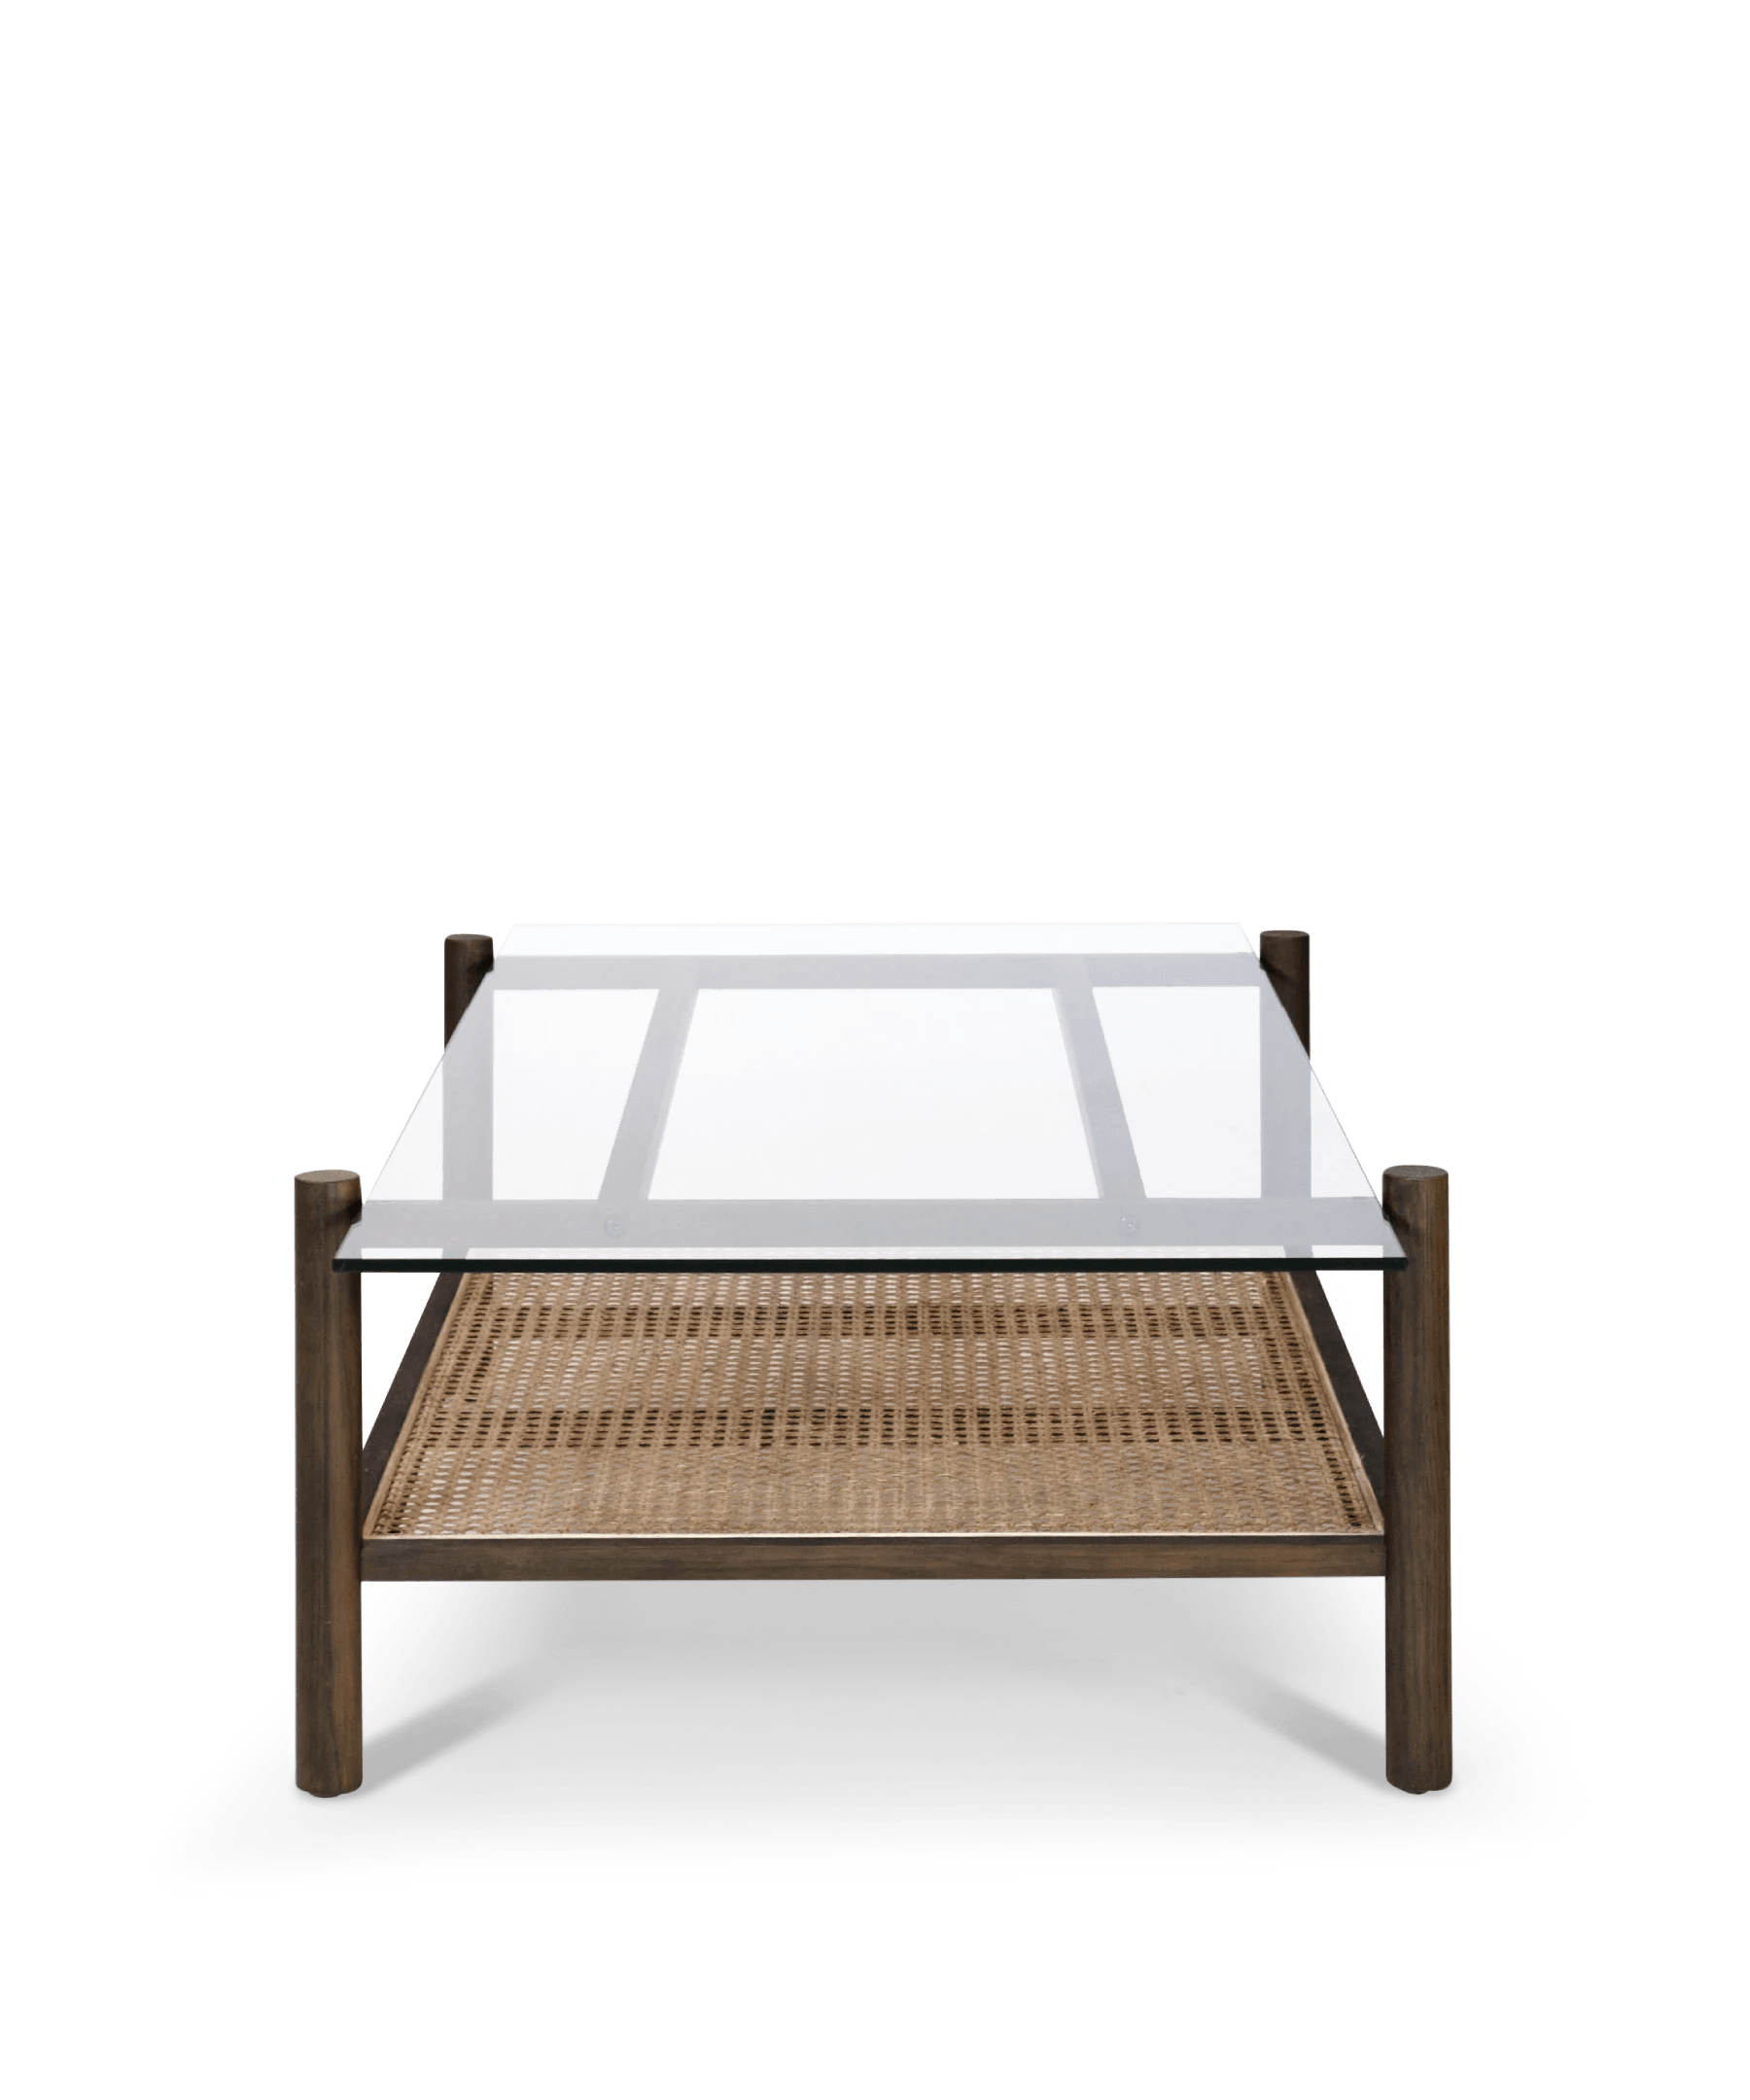 Neo coffee table with glass top - Smoked brown